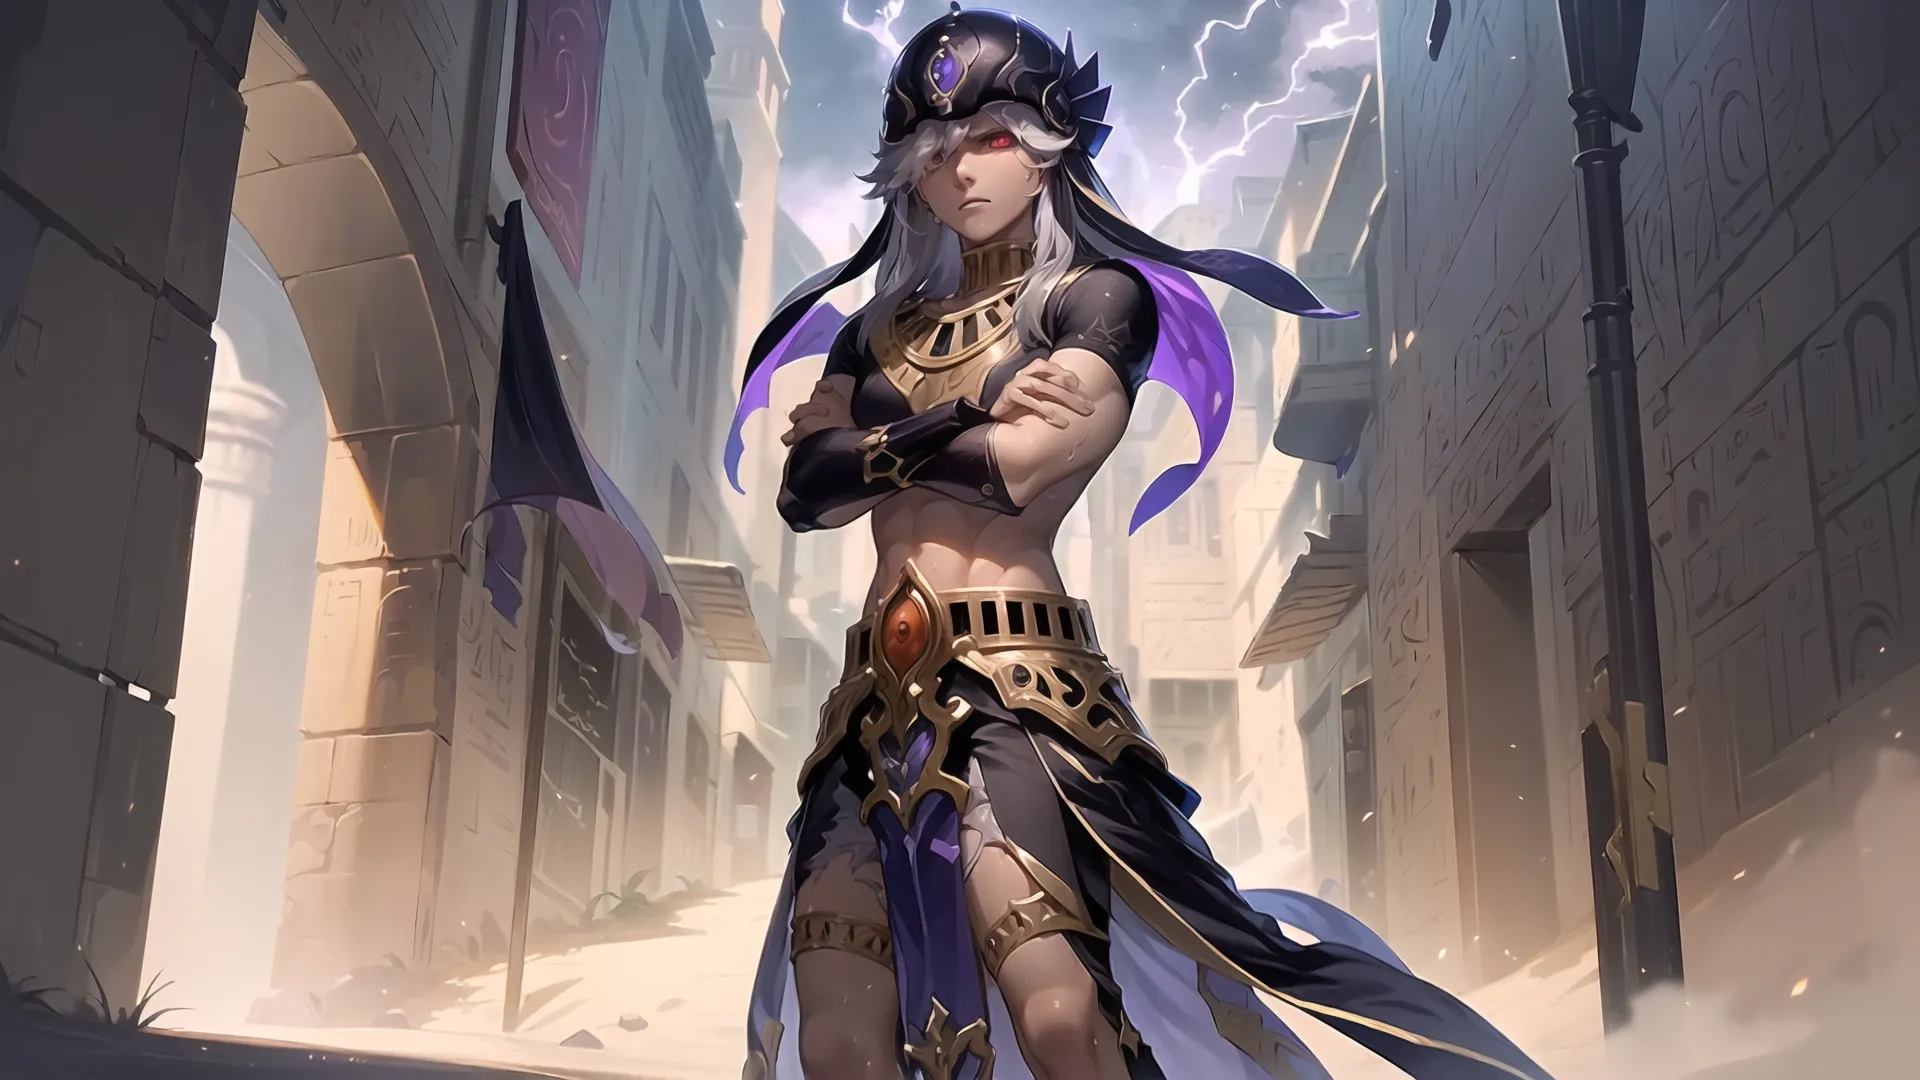 an image of a lady in the midst of a city's streets she has a purple cape on her head and is dressed in a warrior attire
